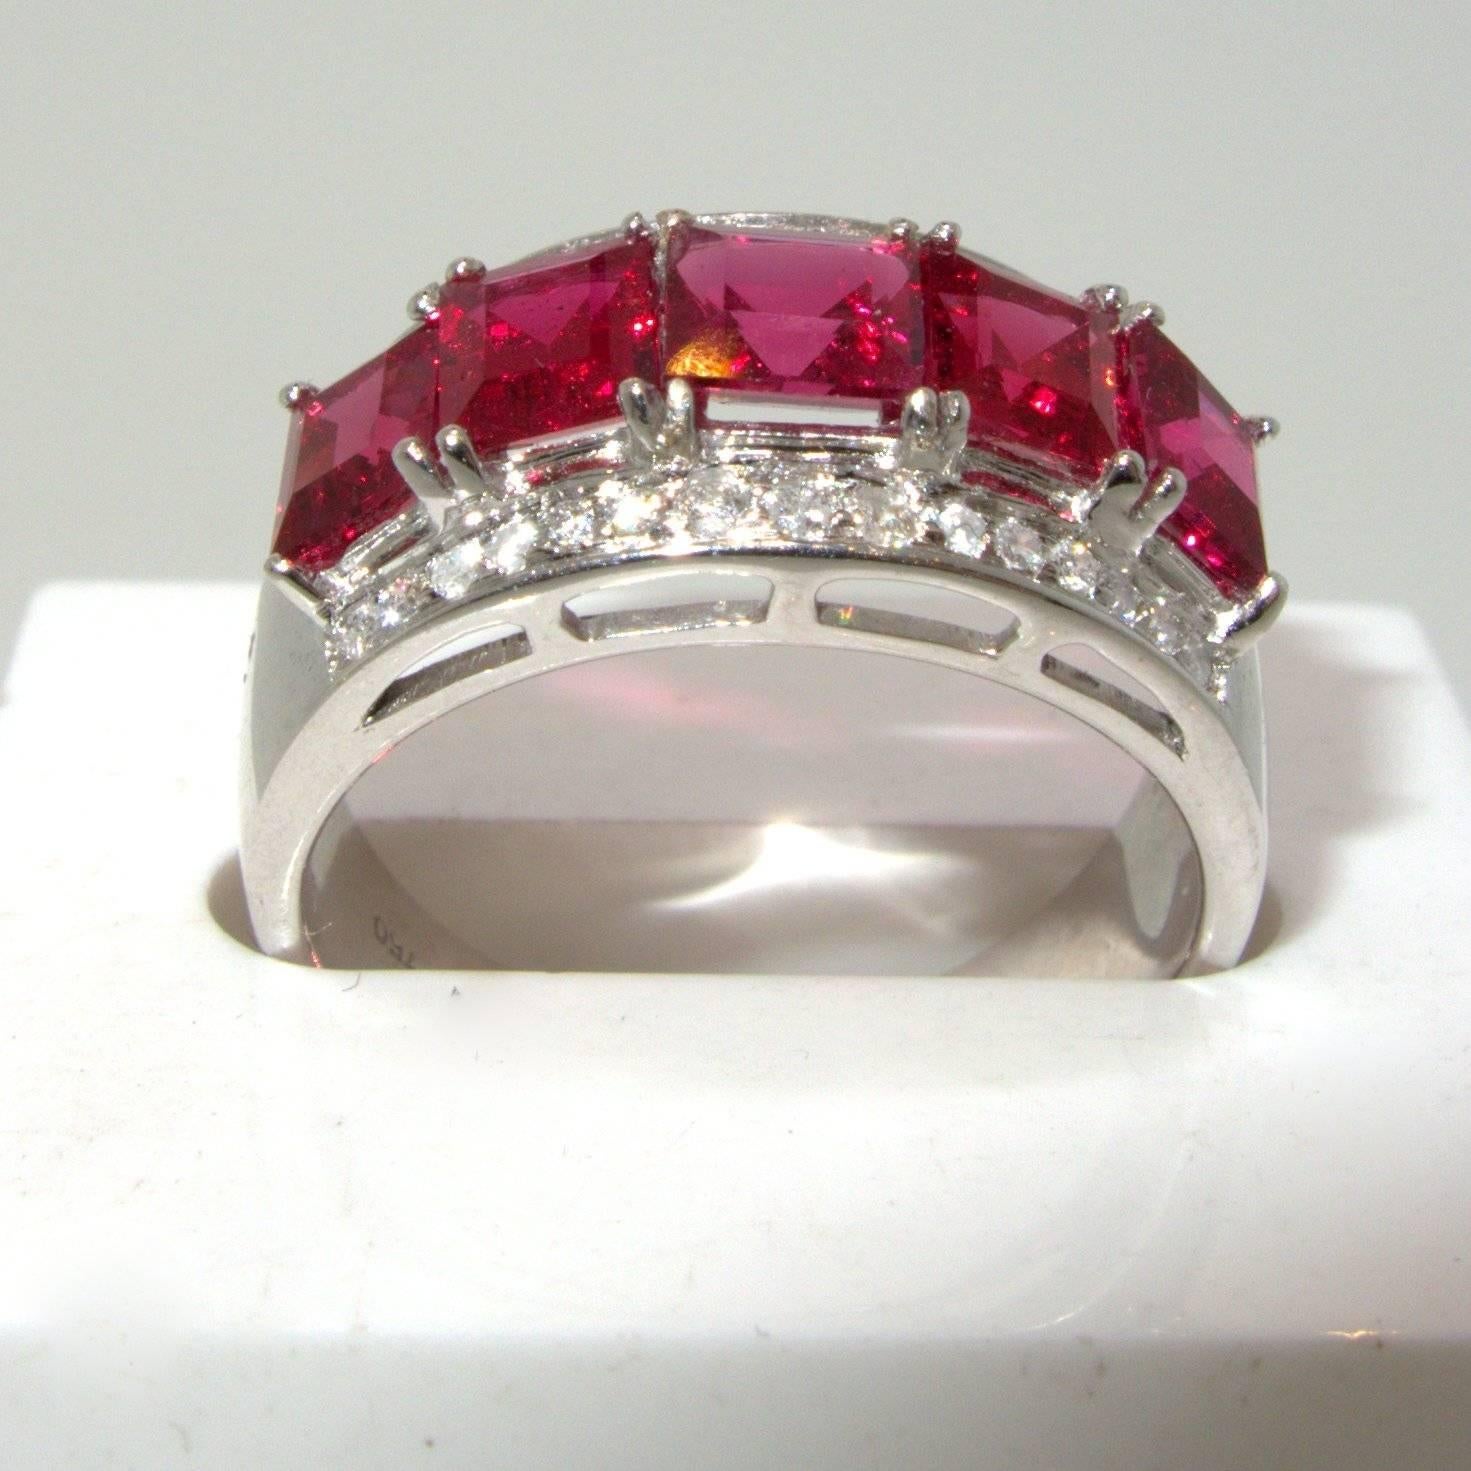 Probably from the Burma region, these 5 square cut vibrant red spinel are accented with 30 round modern brilliant cut diamonds.  The total weight of the spinels is approximately 4.50 cts.  These stones are well matched, clean and bright.  There are